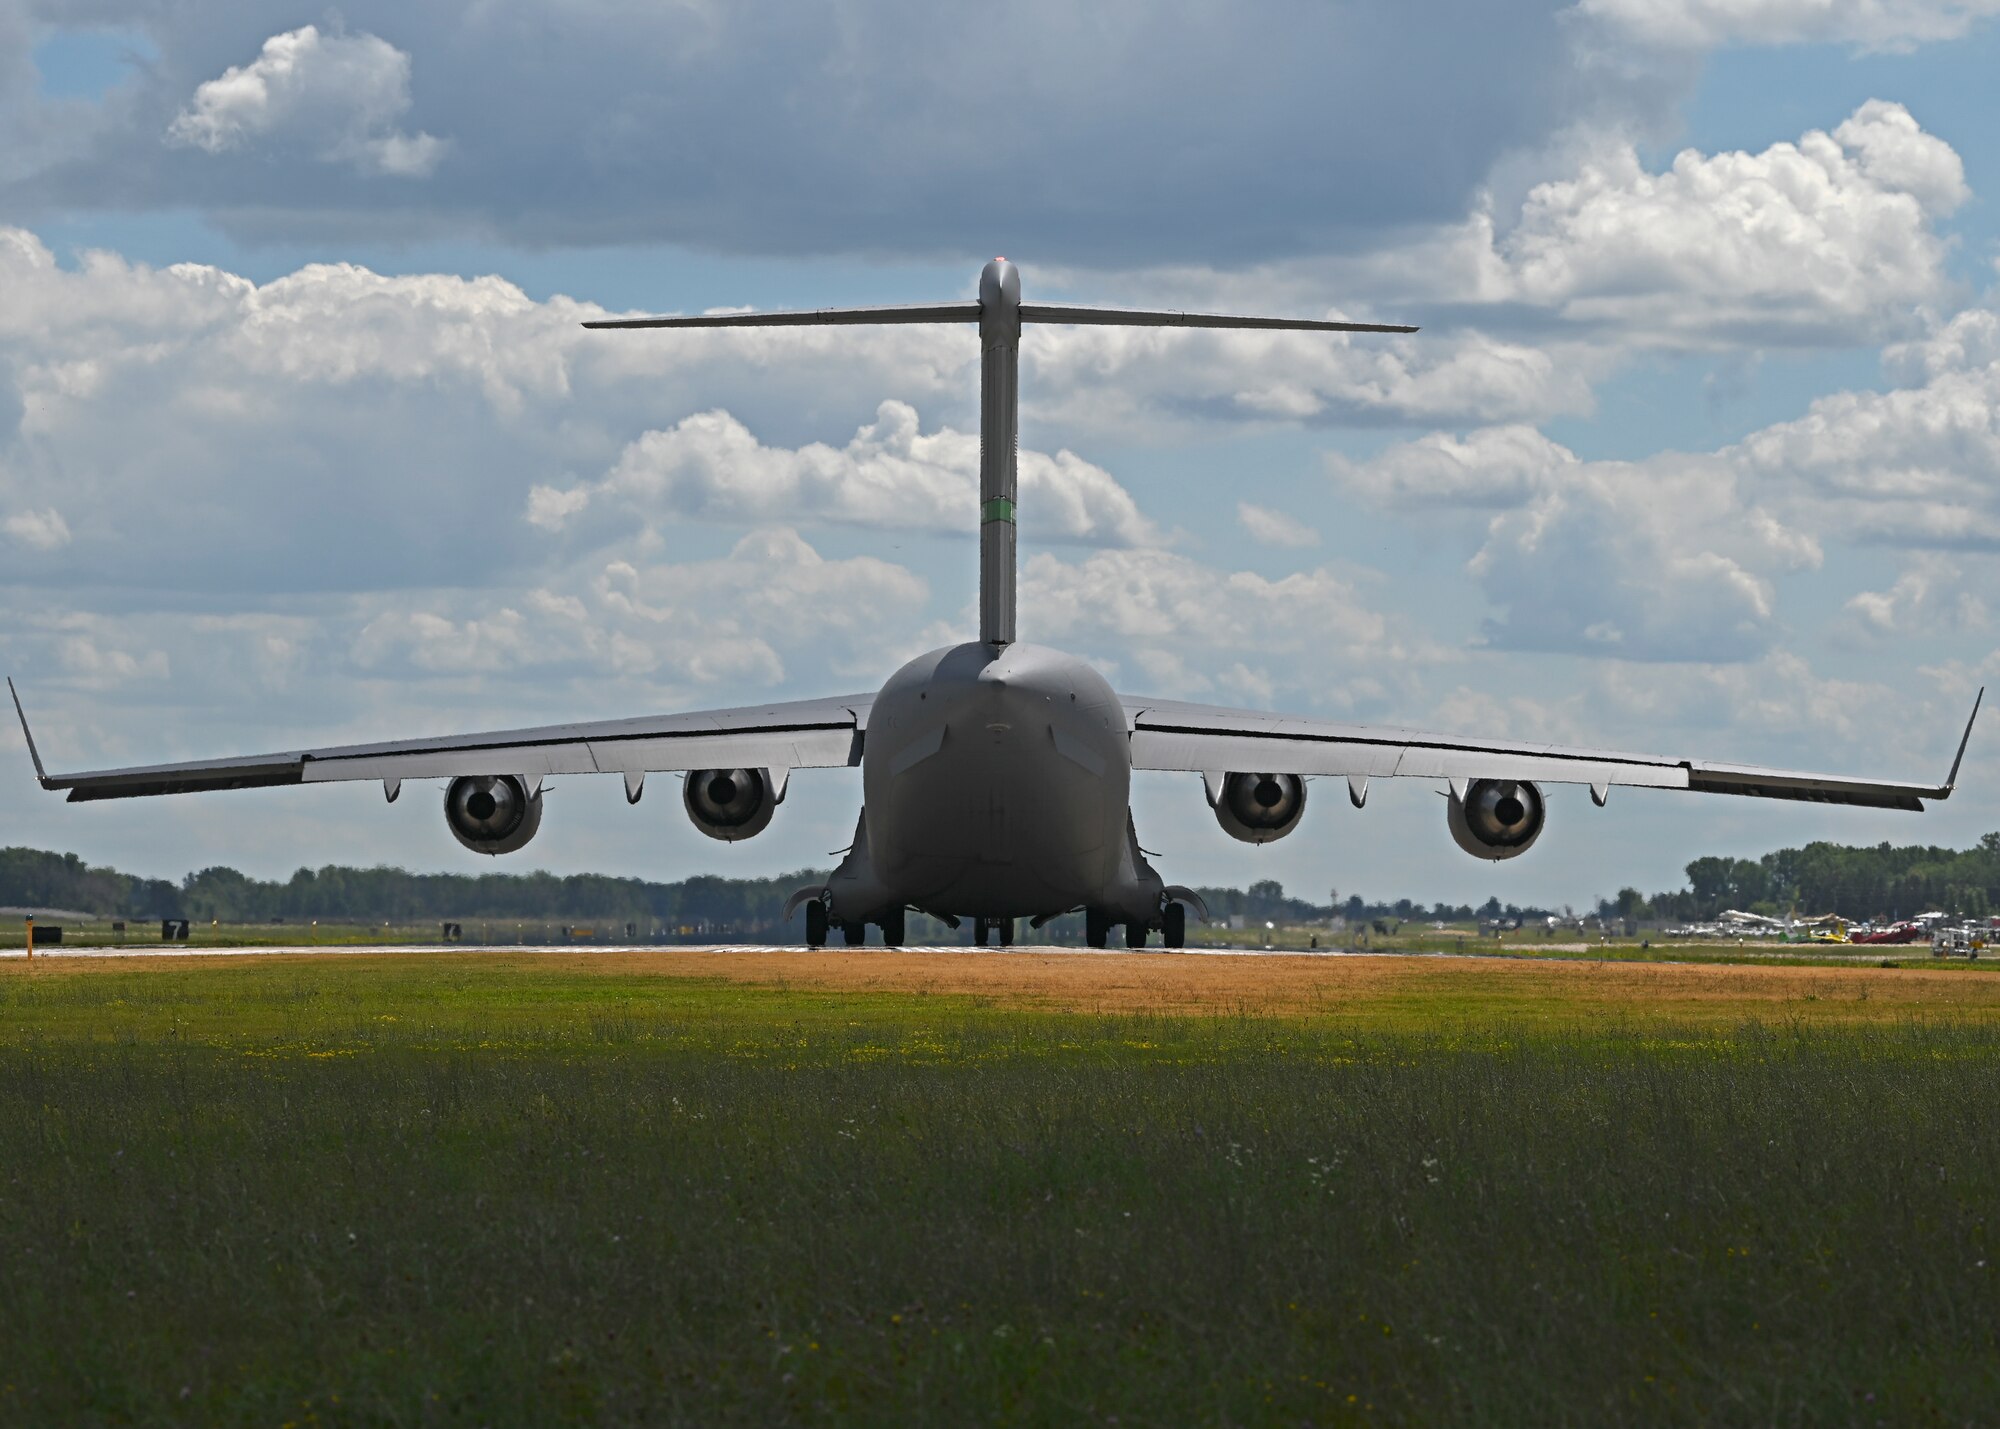 The C-17 West Coast Demonstration Team prepares for takeoff in a C-17 Globemaster III assigned to the 62d Airlift Wing at the Experimental Aircraft Association Airventure Air Show, Oshkosh, Wis., July 31, 2022. EAA is the largest annual air show in the U.S. and coined as The World’s Greatest Aviation celebration. (U.S. Air Force photo by Senior Callie Norton)